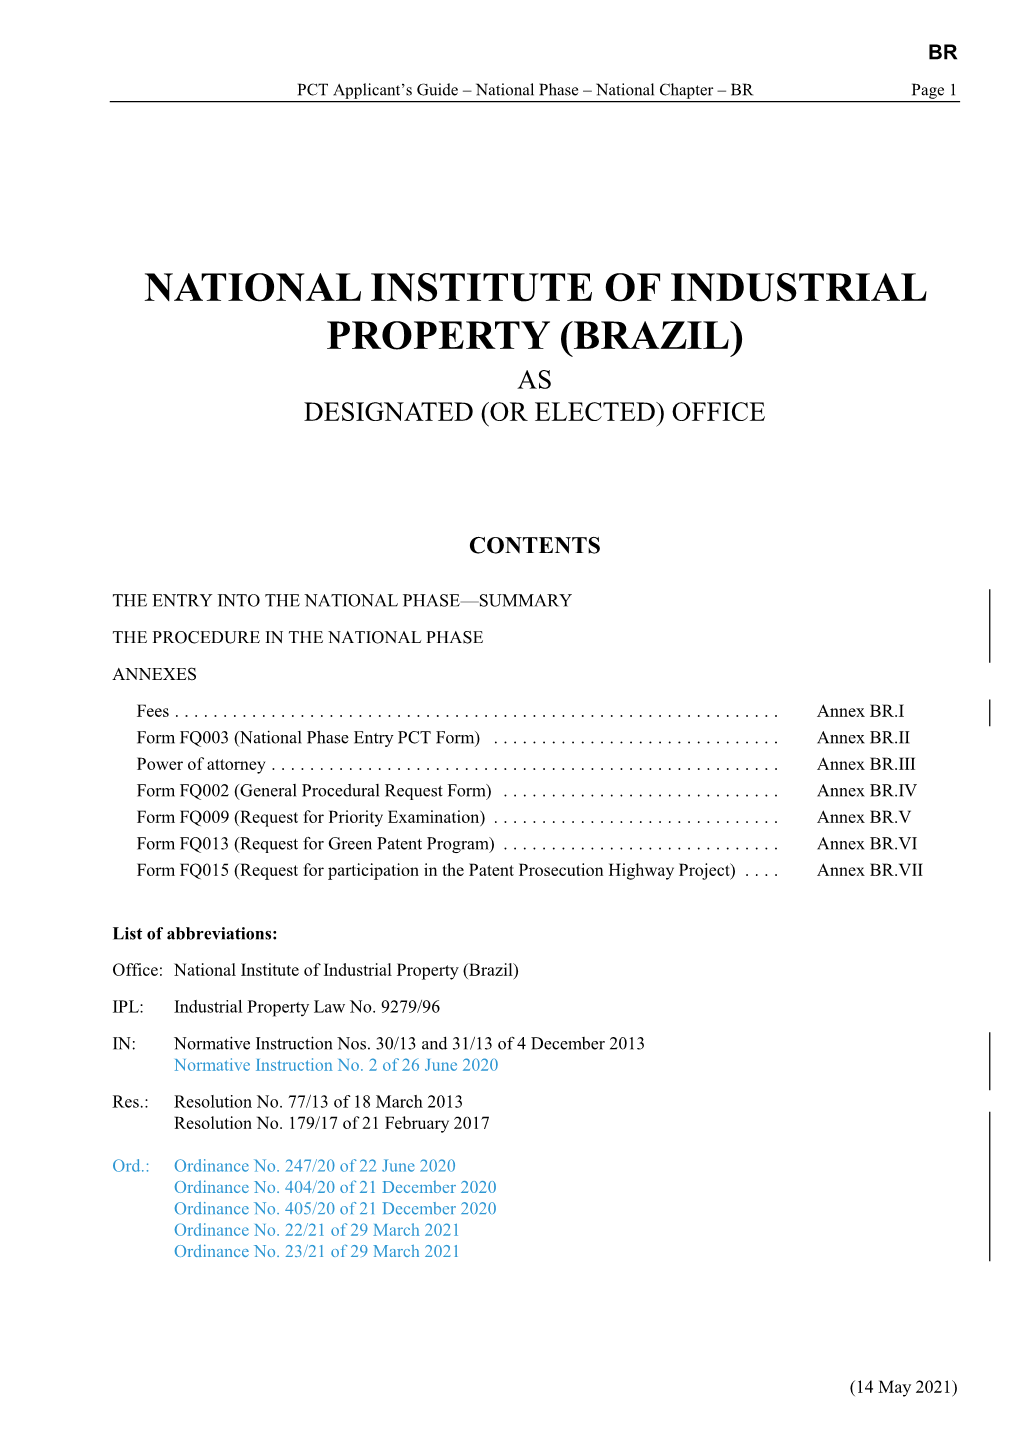 National Institute of Industrial Property (Brazil) As Designated (Or Elected) Office